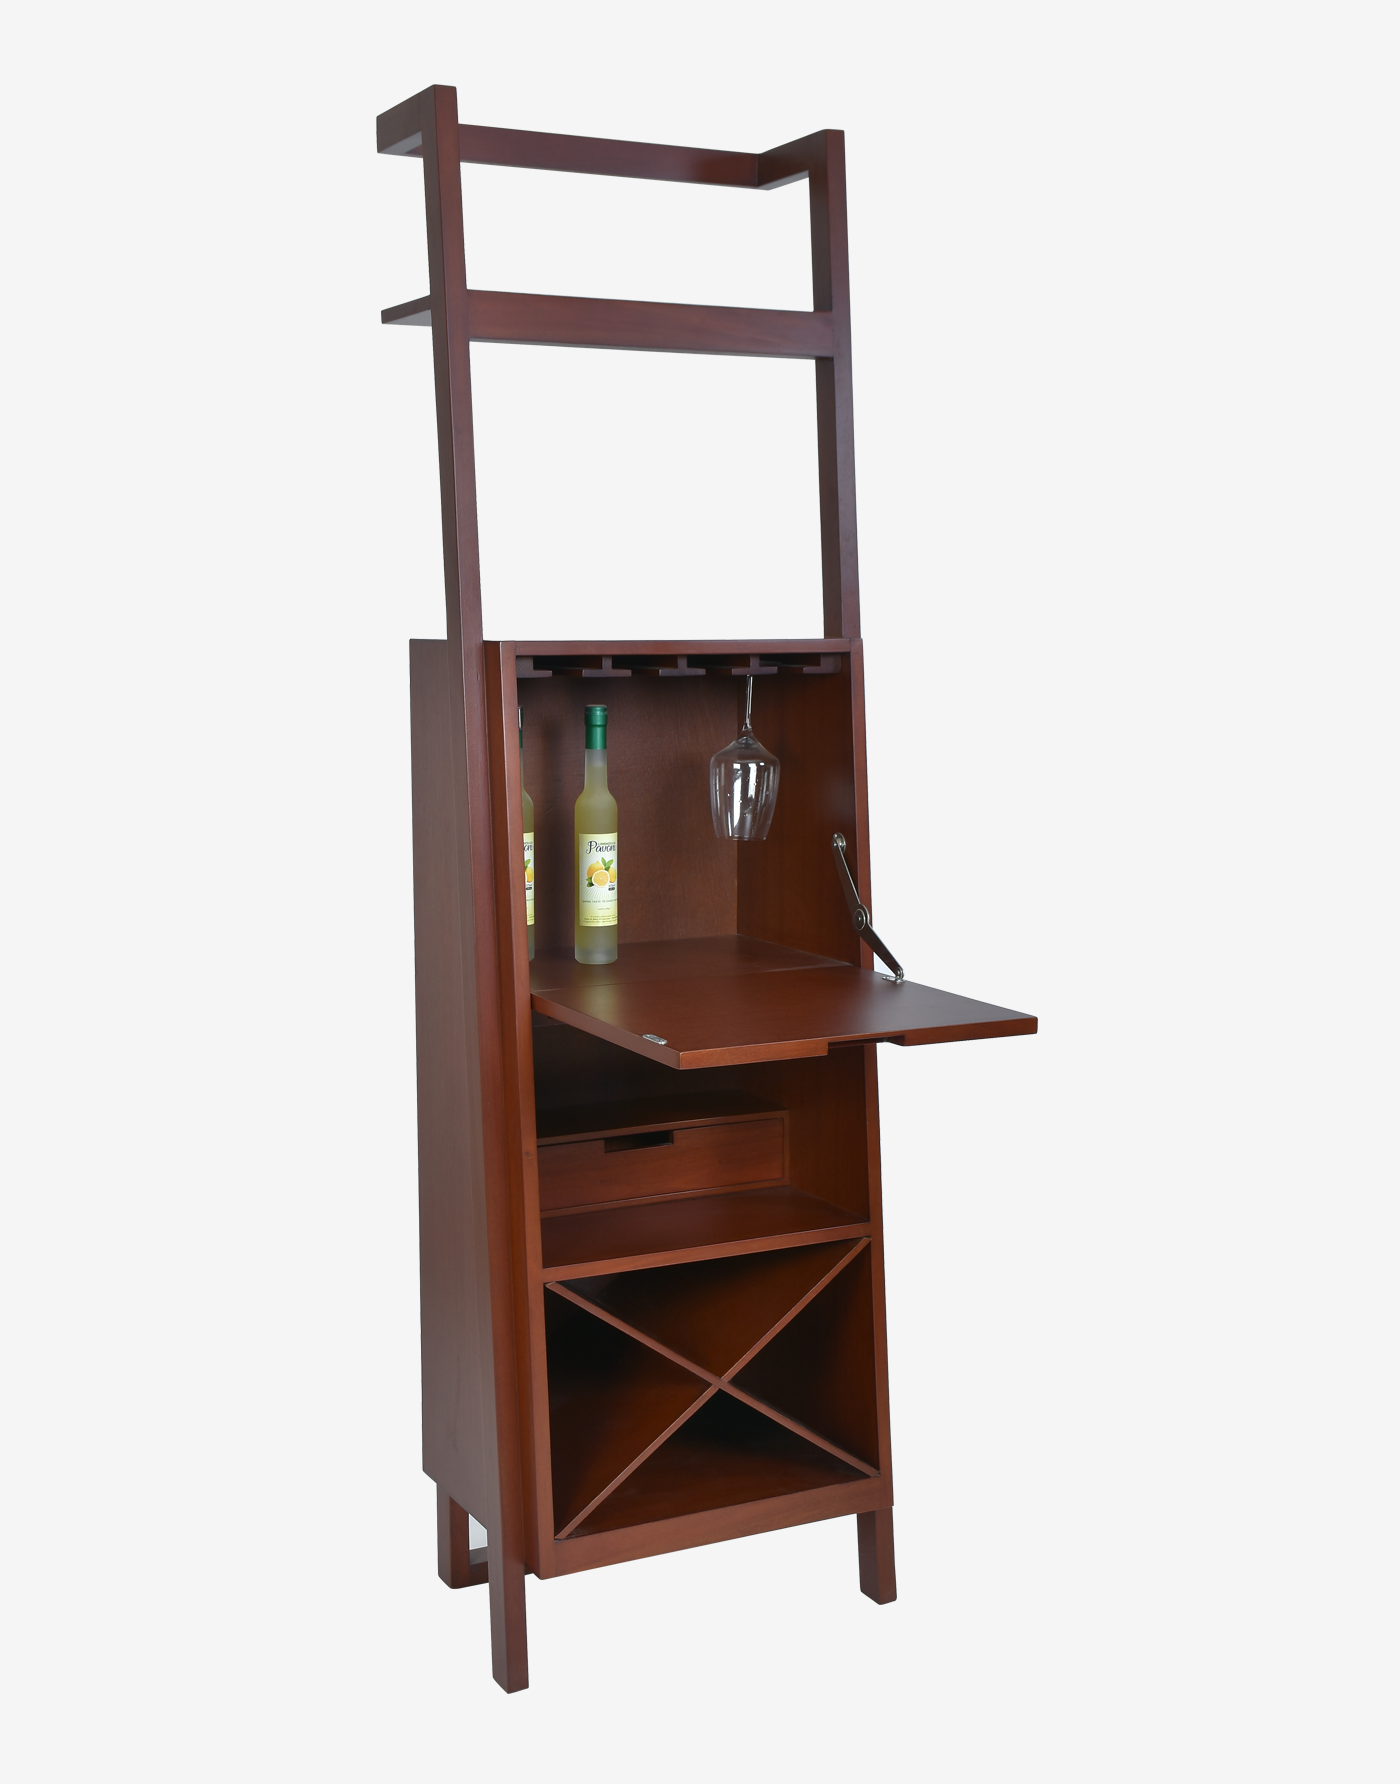 Bar Cabinet - Focolare Carpentry - Made to Order Furniture Philippines. High Quality, Custom-made Furniture - Manila, Philippines. Custom-made Chairs, Tables, Beds, Sofa, Cabinets, Handicraft, Woodworks.